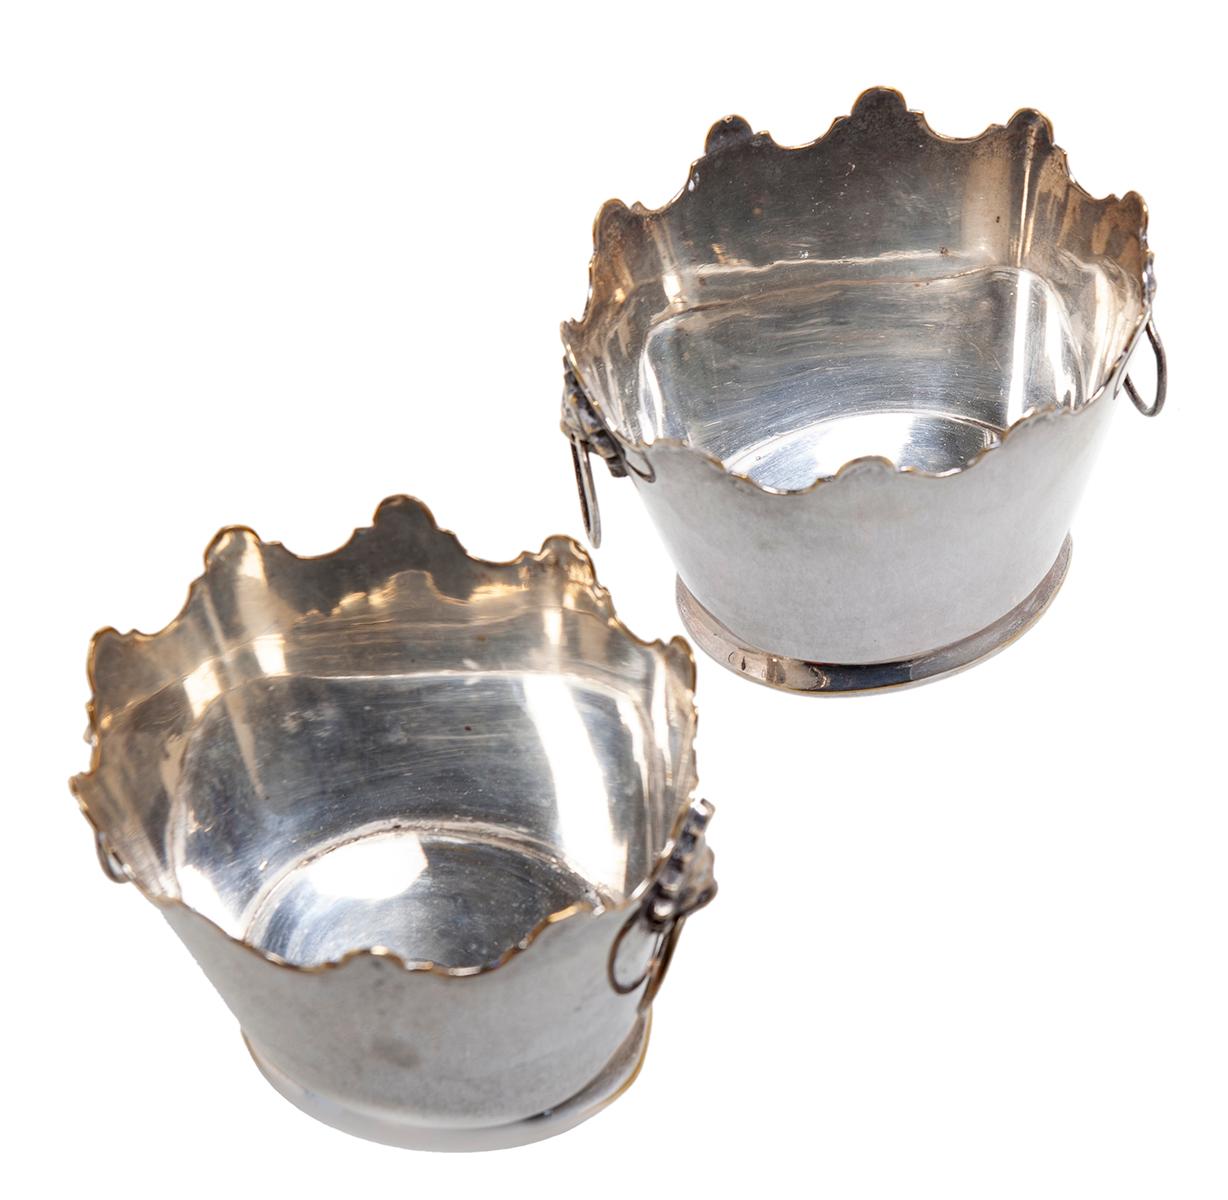 A rare pair of Mottahedeh silver plated miniature cachepots with lions & ring handles. 
These charming pieces can be used as personal ice buckets. Heavier than they look & completely water tight. They would be excellent for a variety of uses